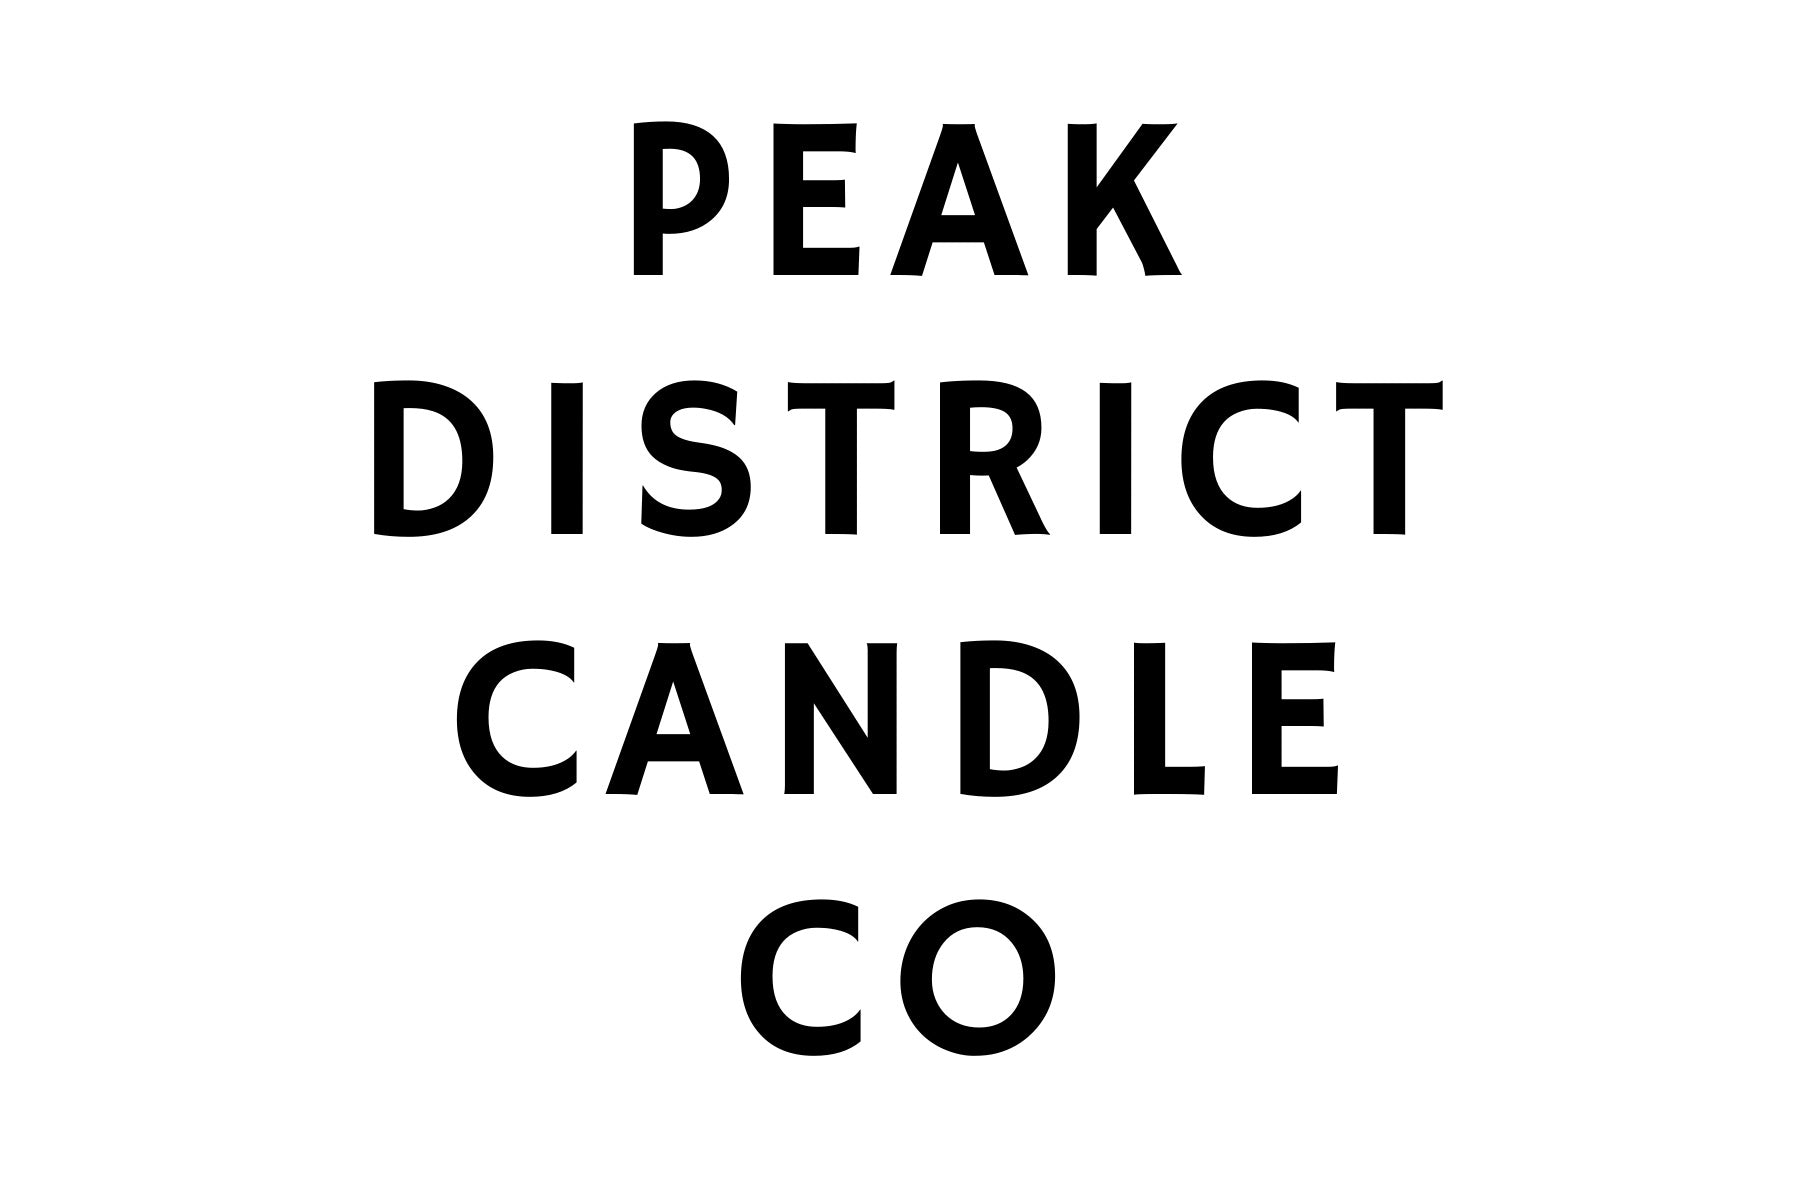 Peak District Candle Company